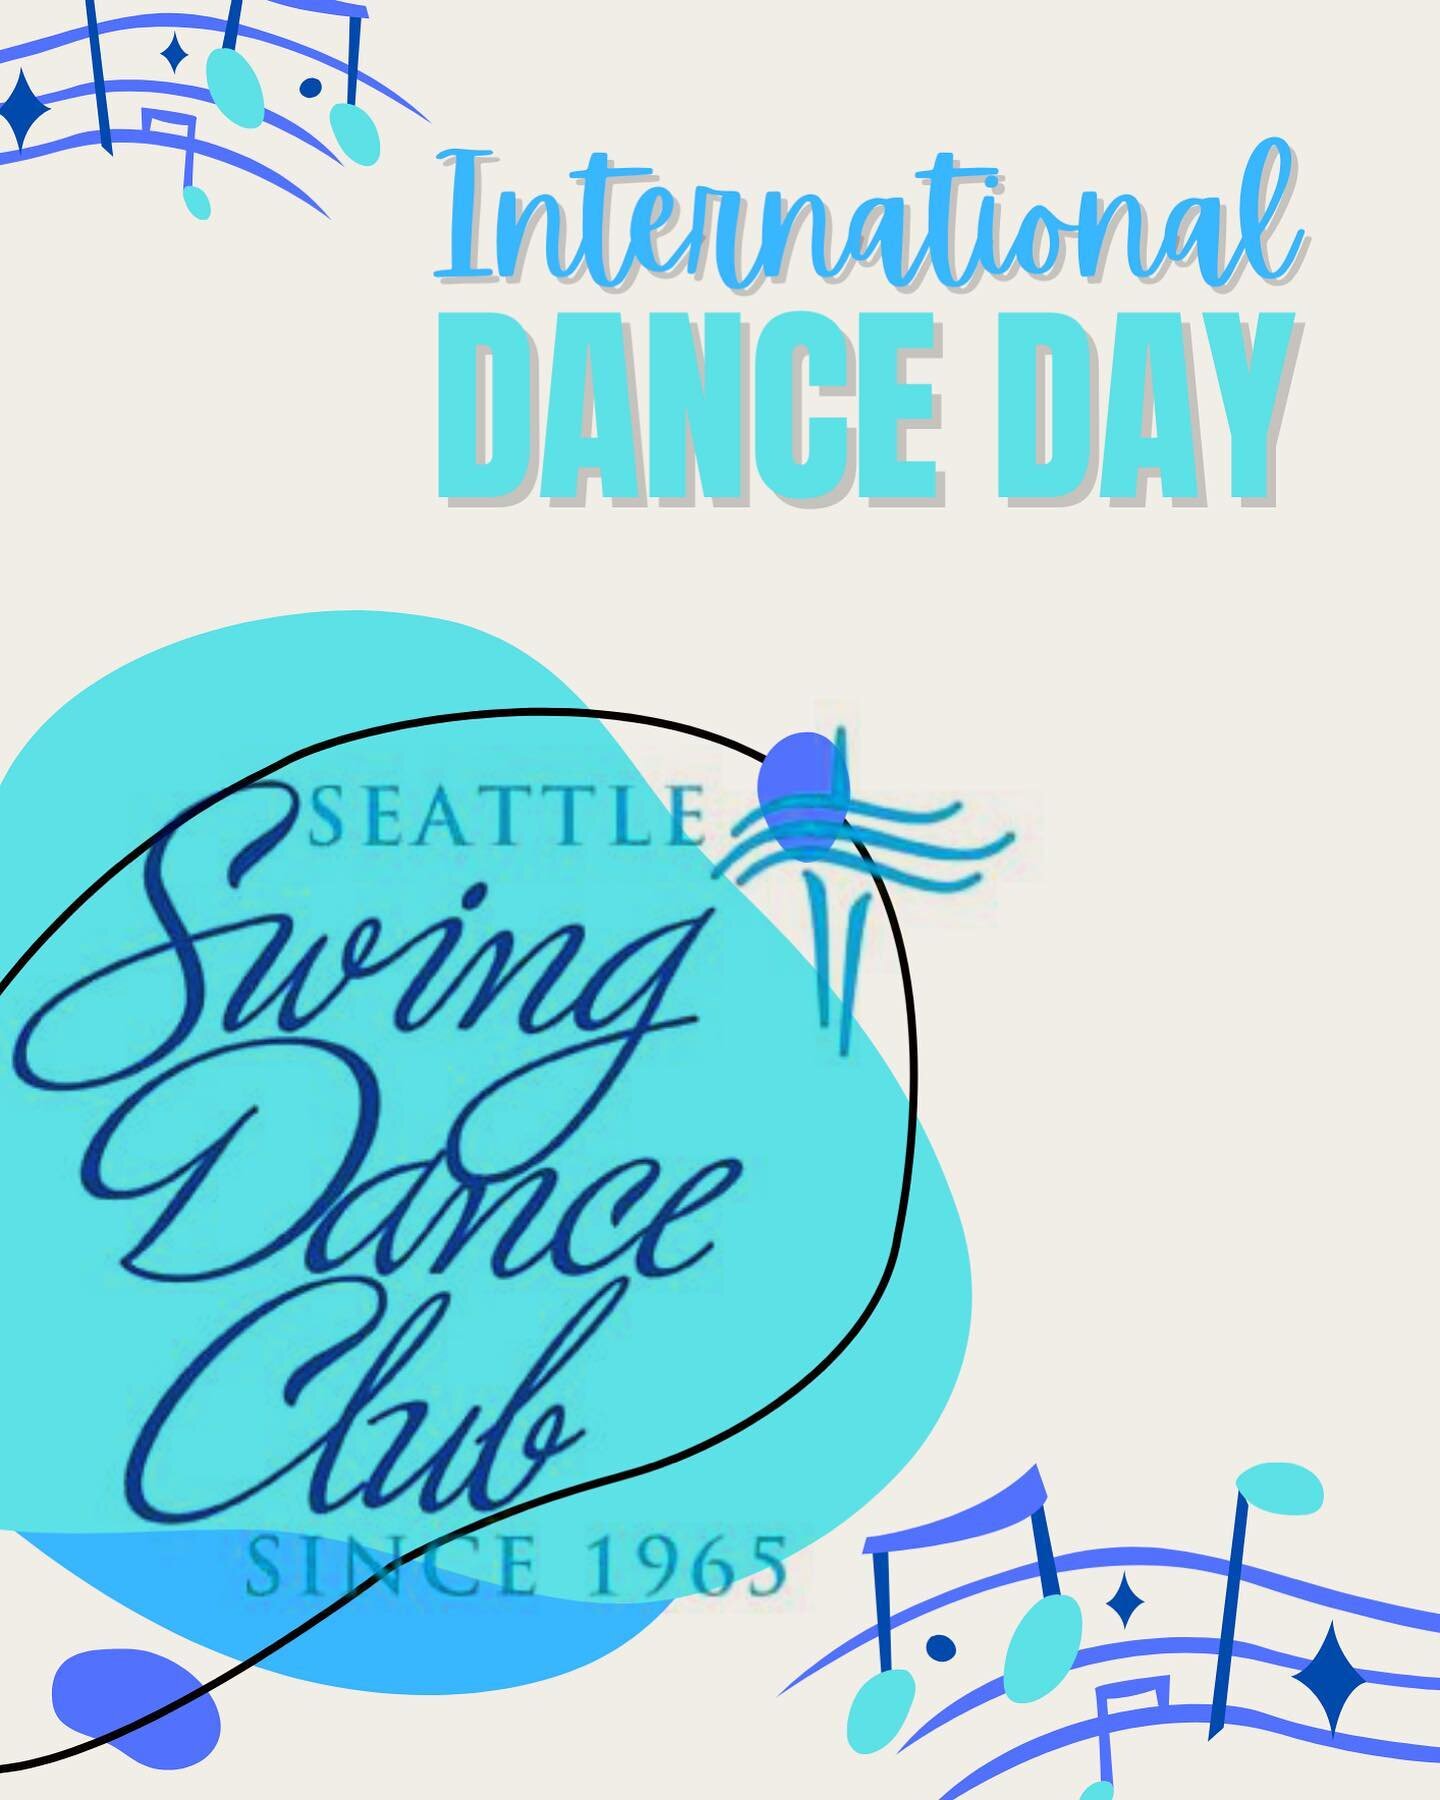 Happy #InternationalDanceDay from your favorite local dance club, @seattleswingdanceclub! See you this Sunday 5/1/22 for our first dance back since 2020. Event details on our website or Facebook! 

www.seattleswingdanceclub.com

#SeattleSwingDanceClu